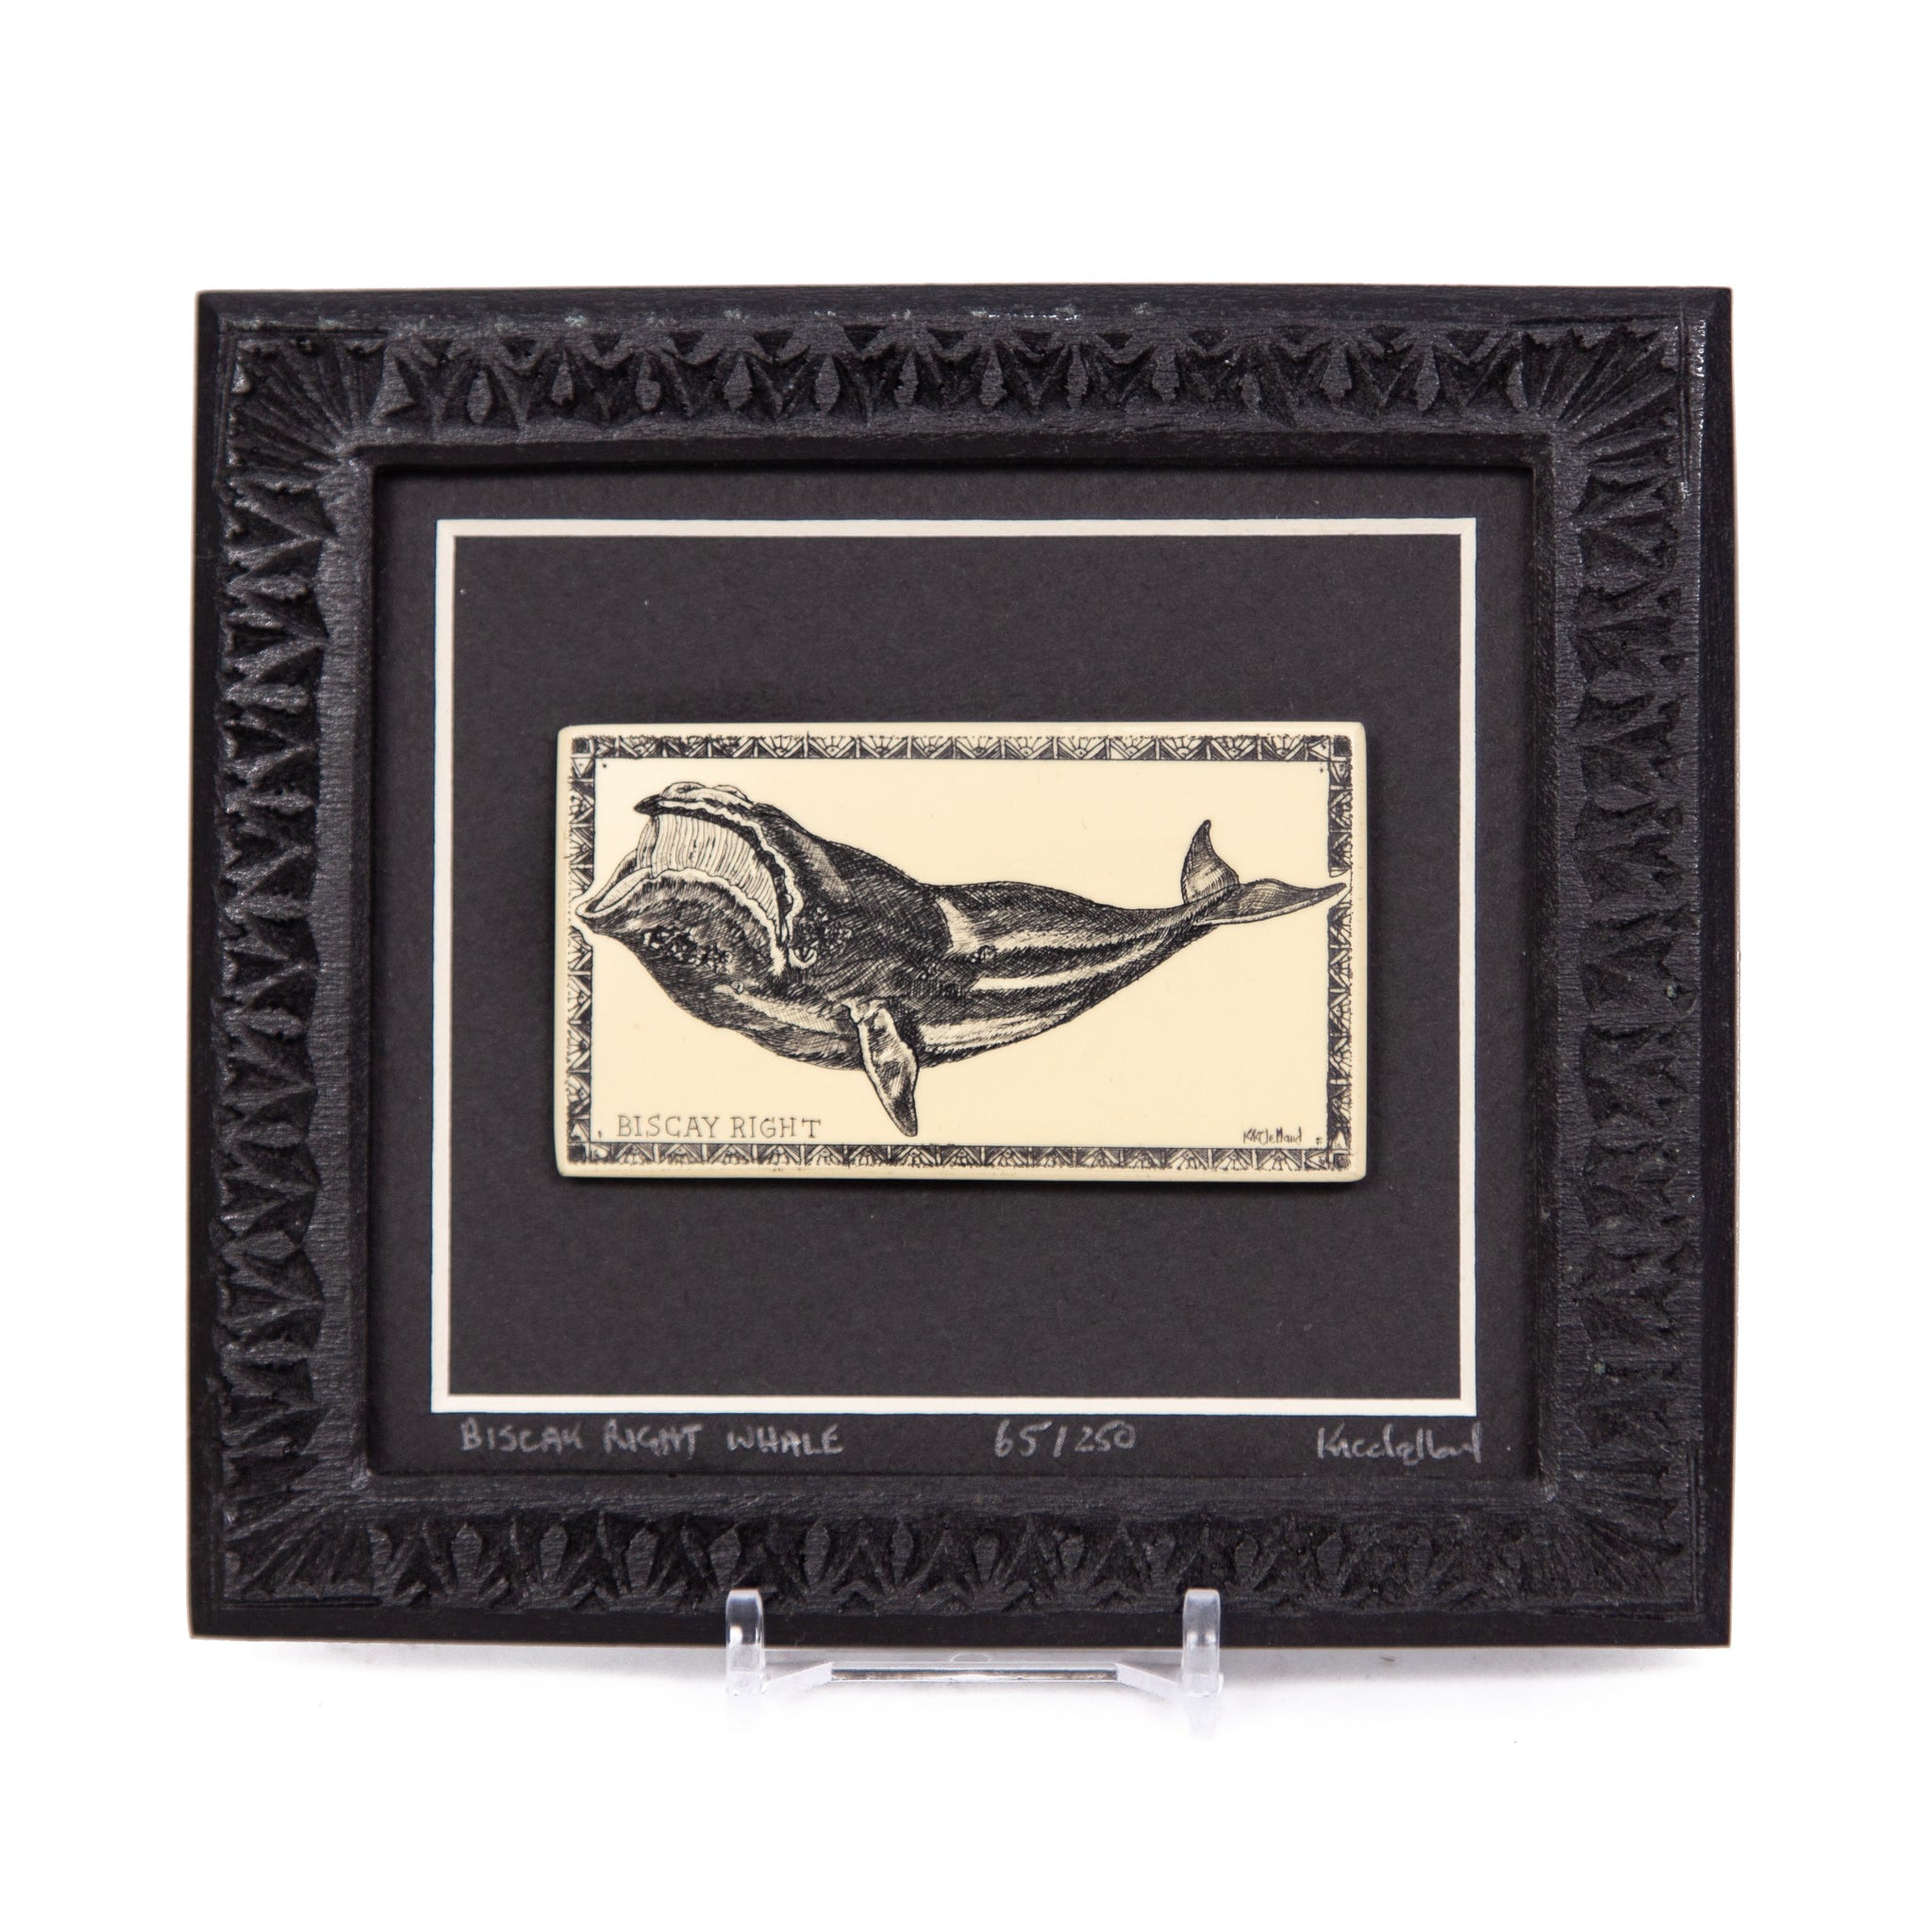 "Biscay Right Whale" Large Chip Carved Frame